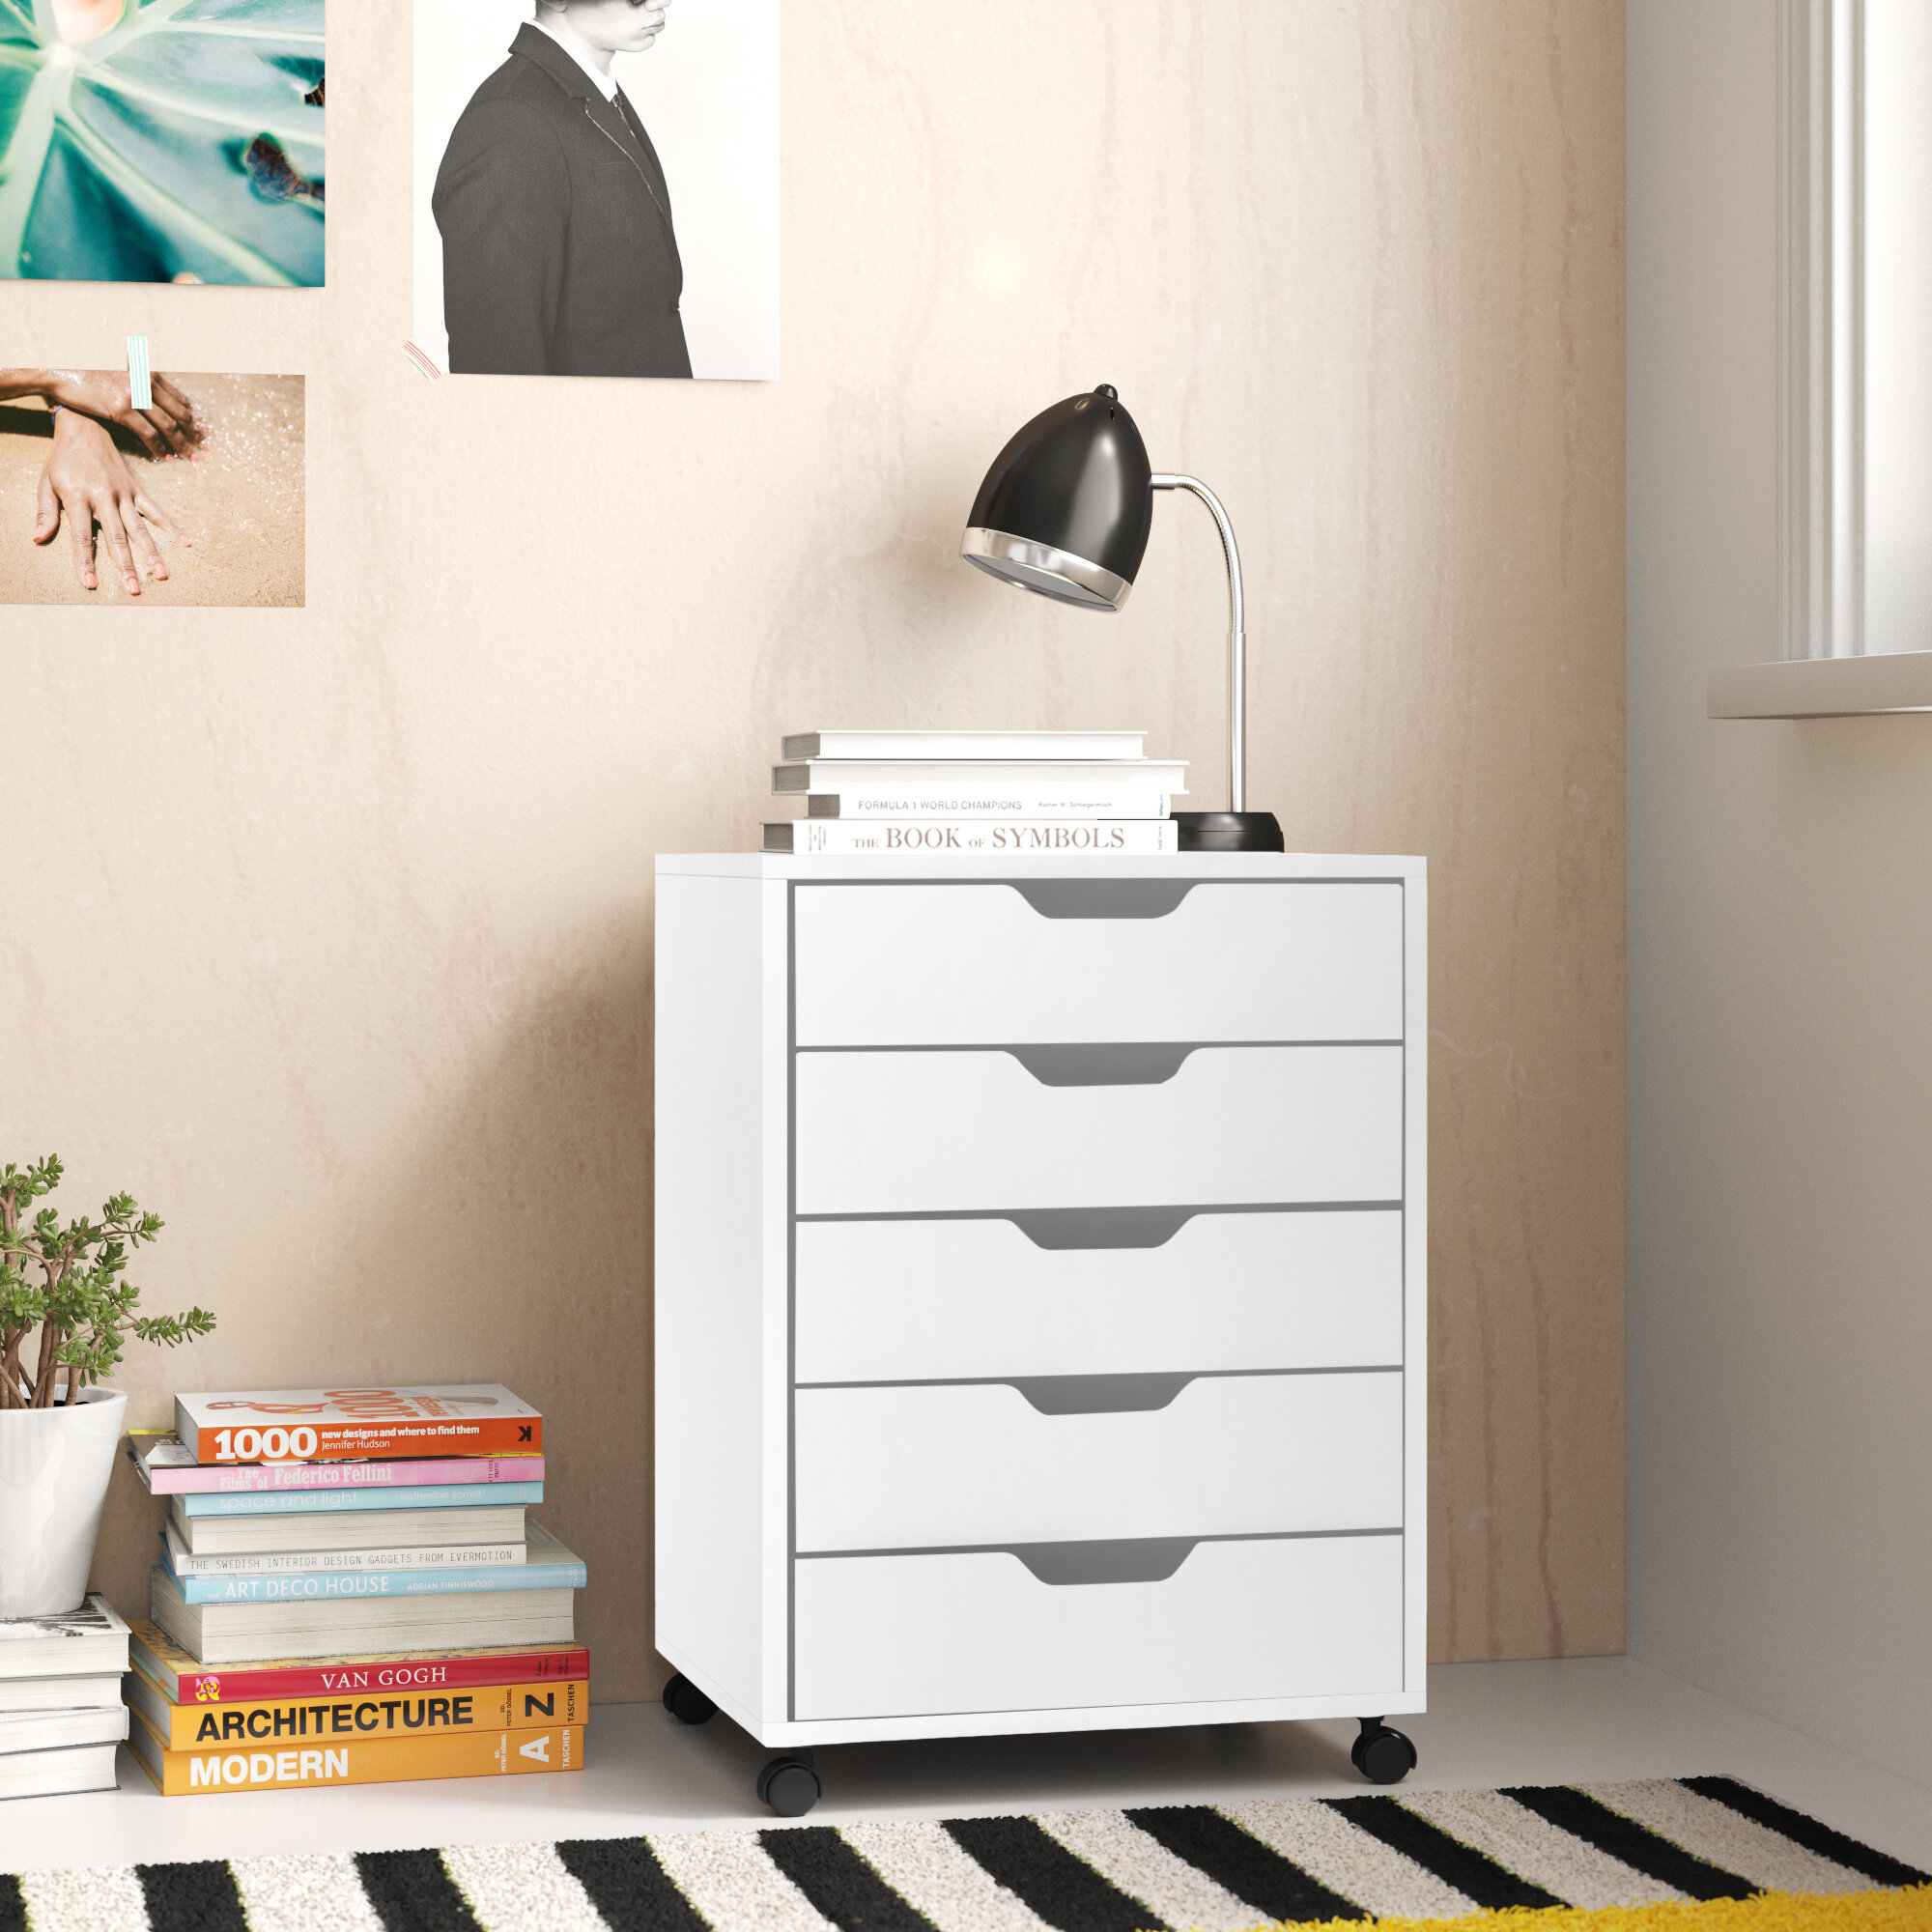 Mobile Storage Cabinet for Closet and Office for Home Office Living Room Wooden Storage Cabinet 5-Drawer Wood Filing Cabinet White Color